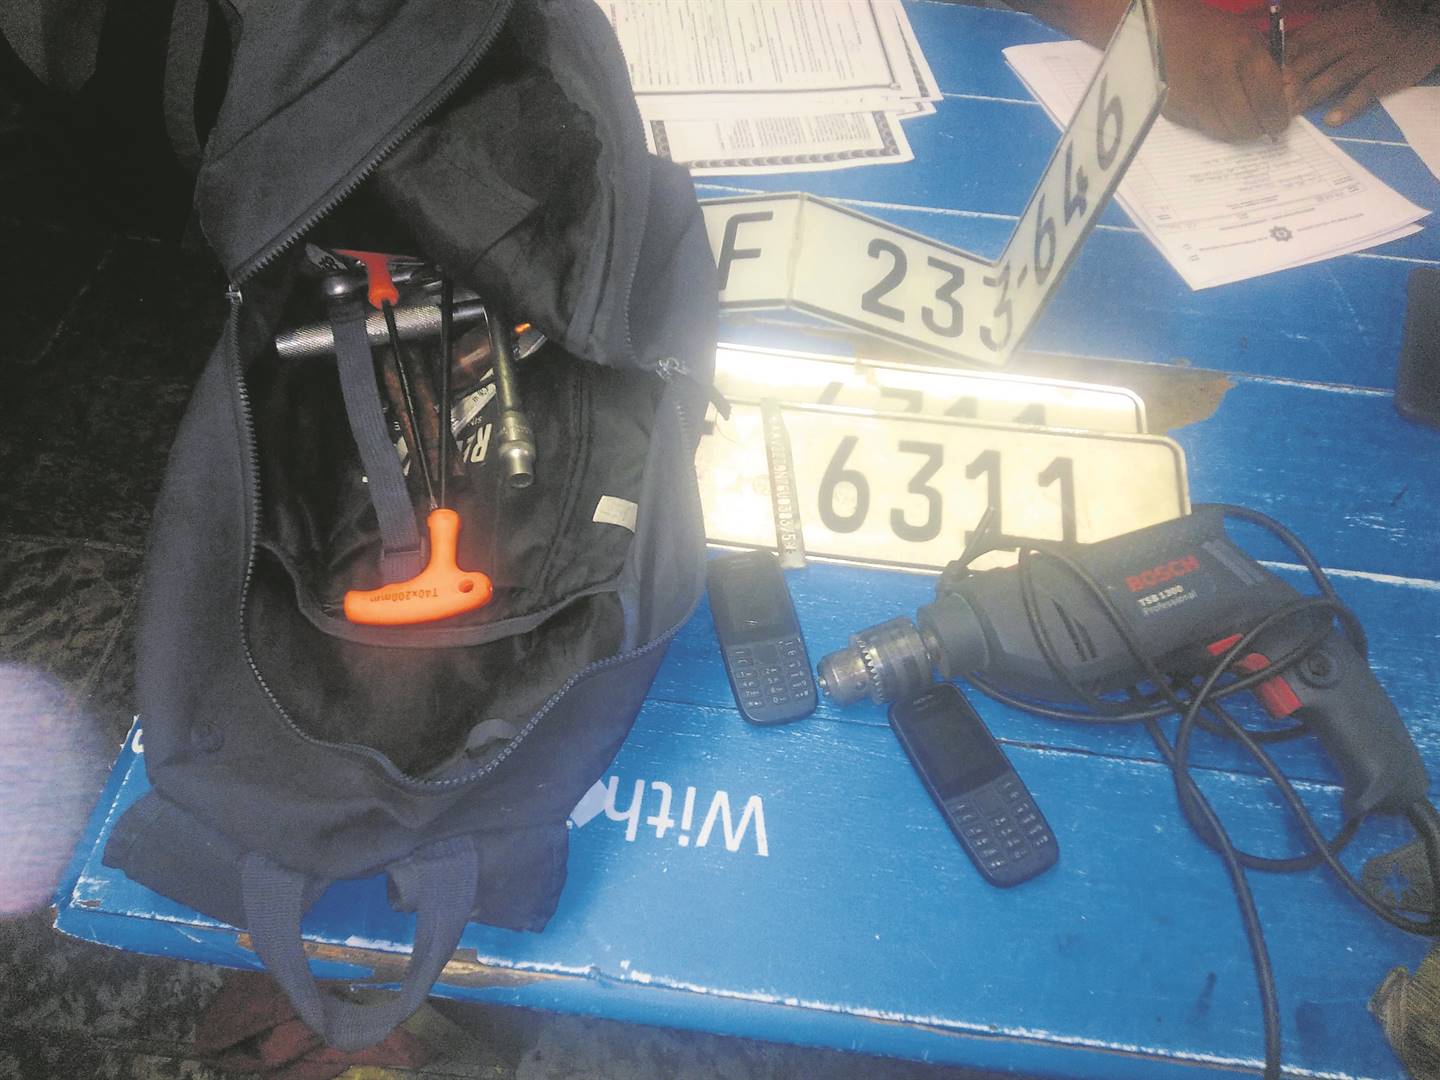 Two carjacking suspects aged 37 and 58 were caught with these items by Harare police in 31 Section Makhaza, on Tuesday 8 March.PHOTO: supplied